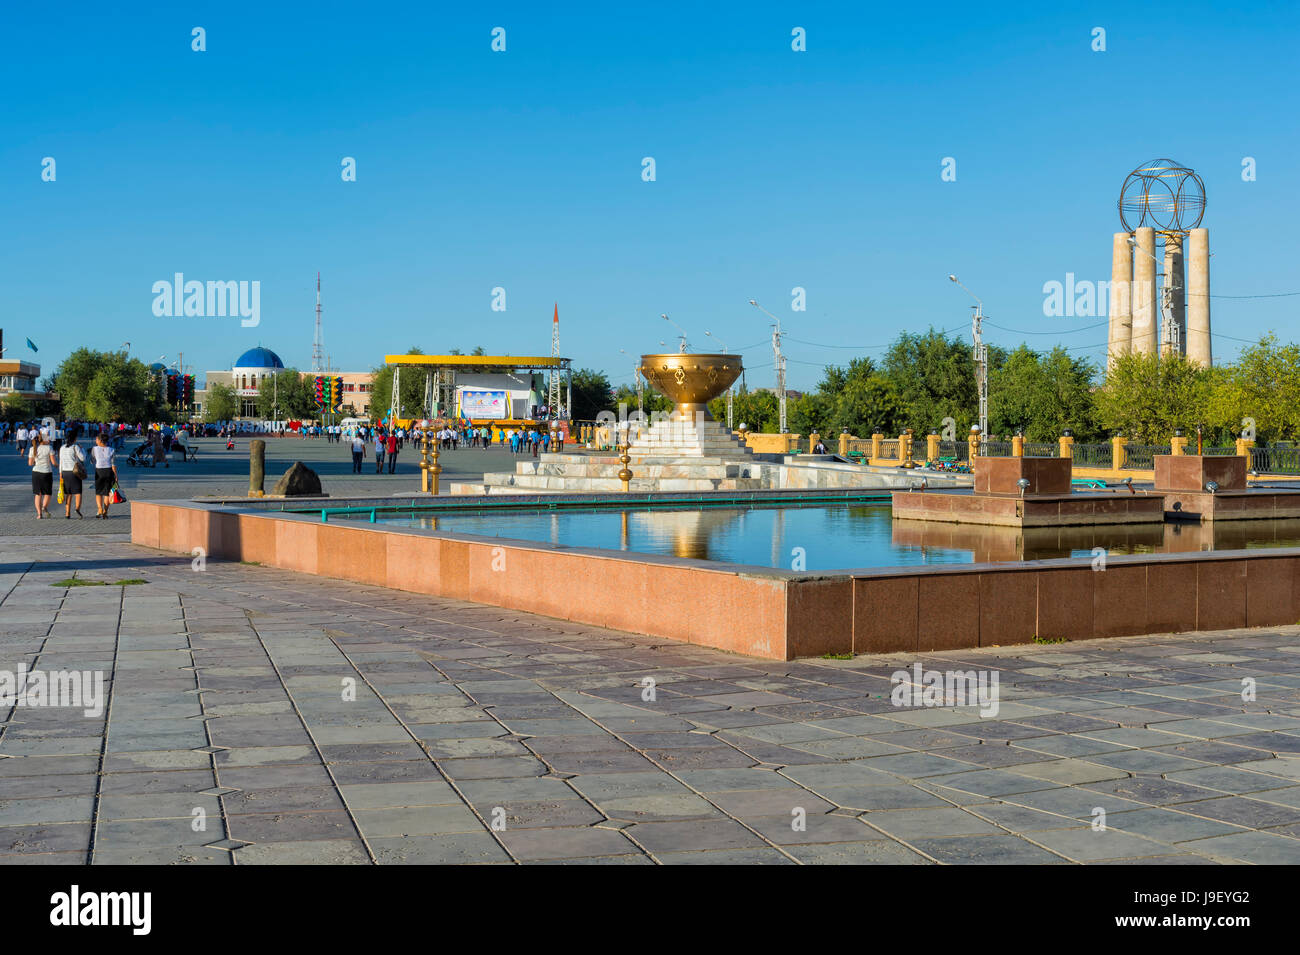 Central square and fountain, Turkistan, South region, Kazakhstan Stock Photo